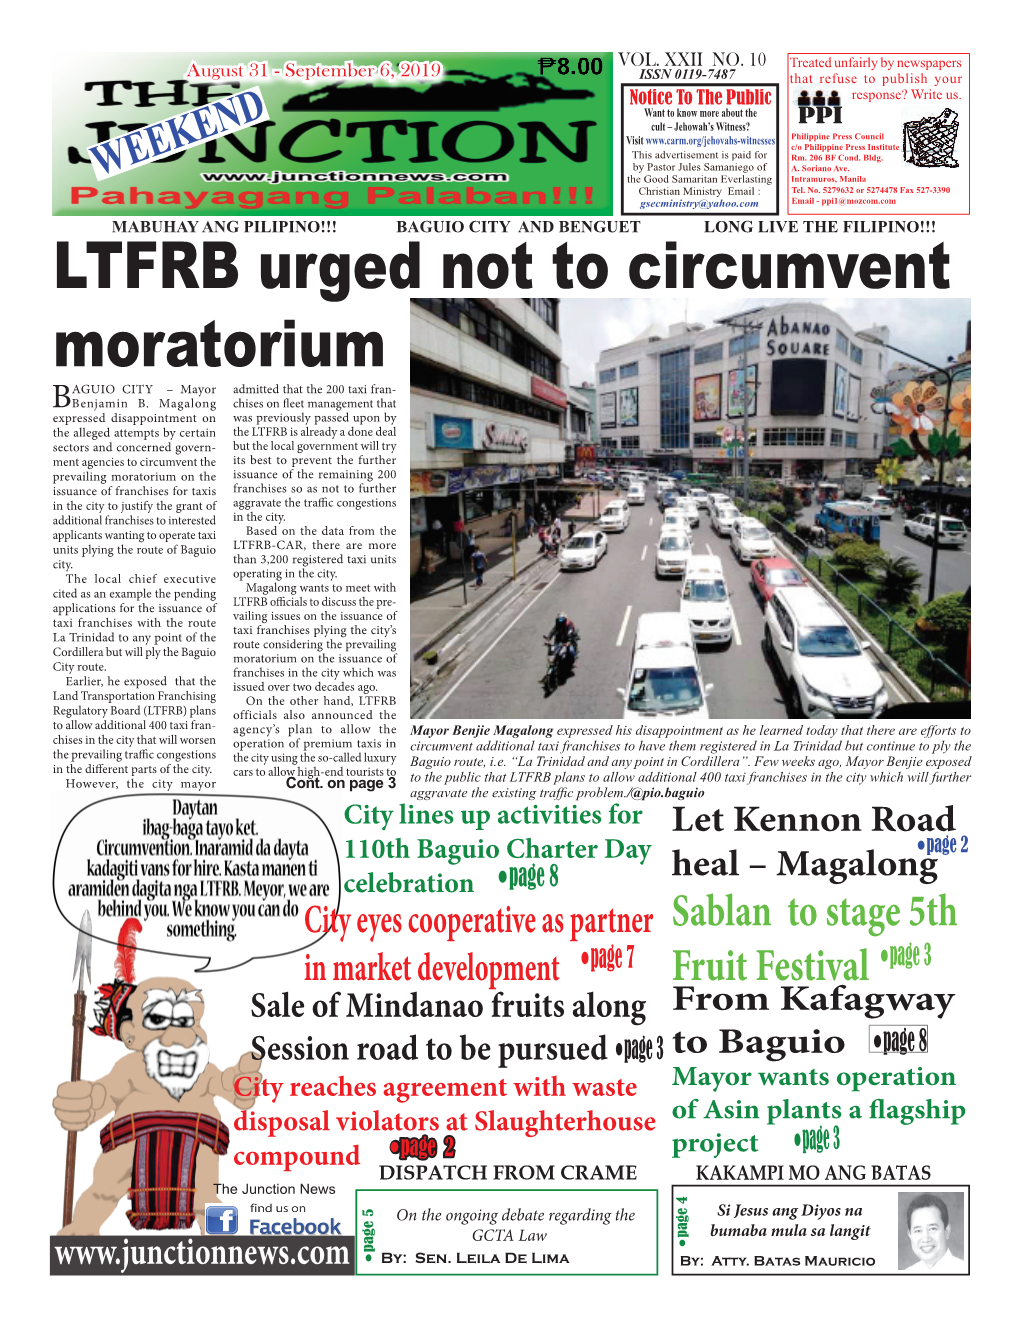 LTFRB Urged Not to Circumvent Moratorium AGUIO CITY – Mayor Admitted That the 200 Taxi Fran- Bbenjamin B